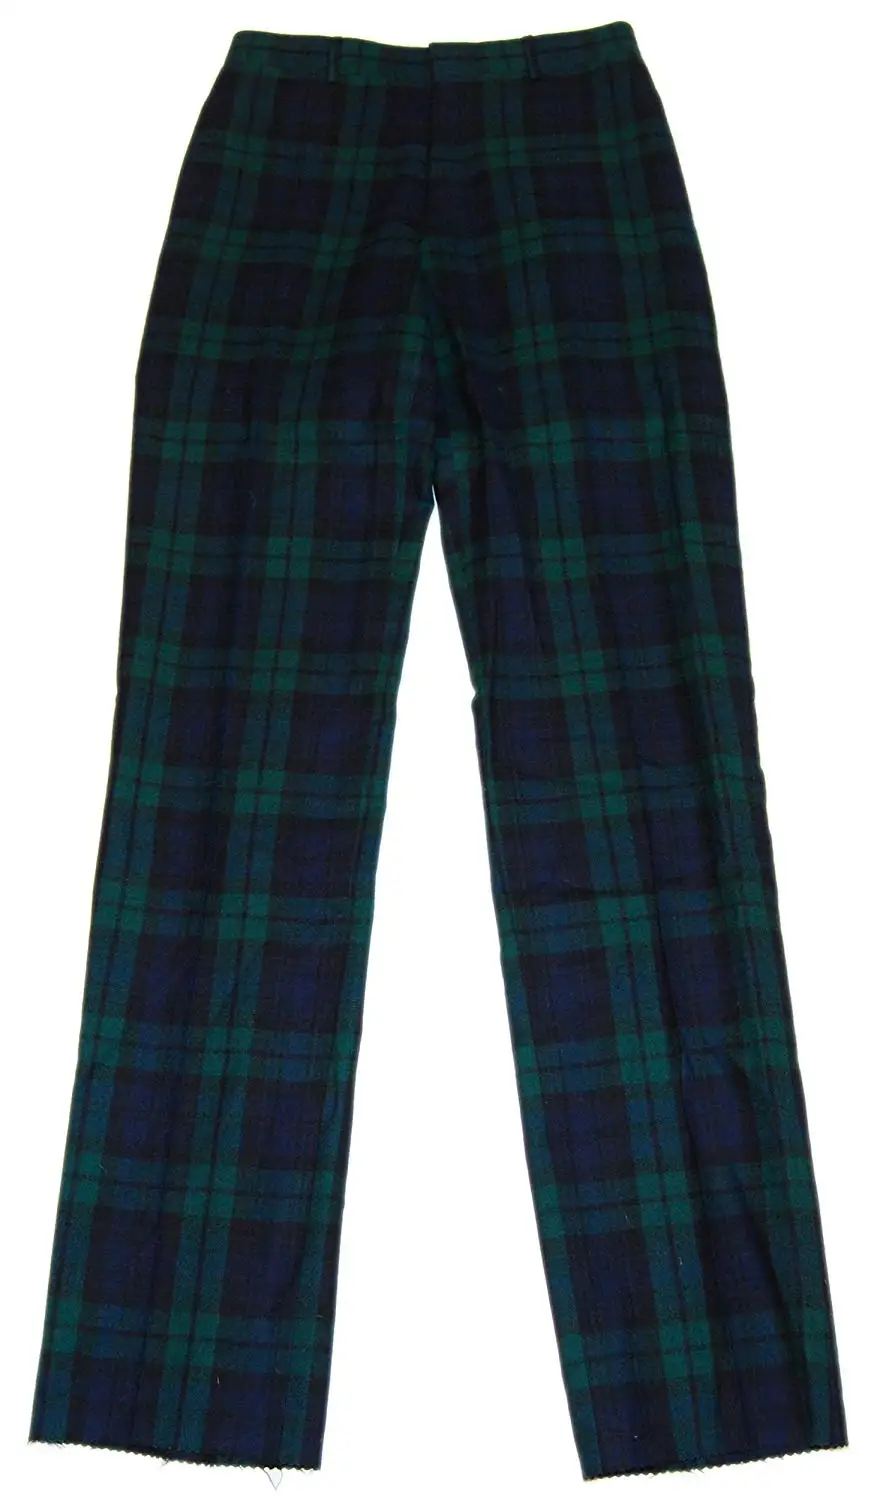 men's navy and green plaid pants